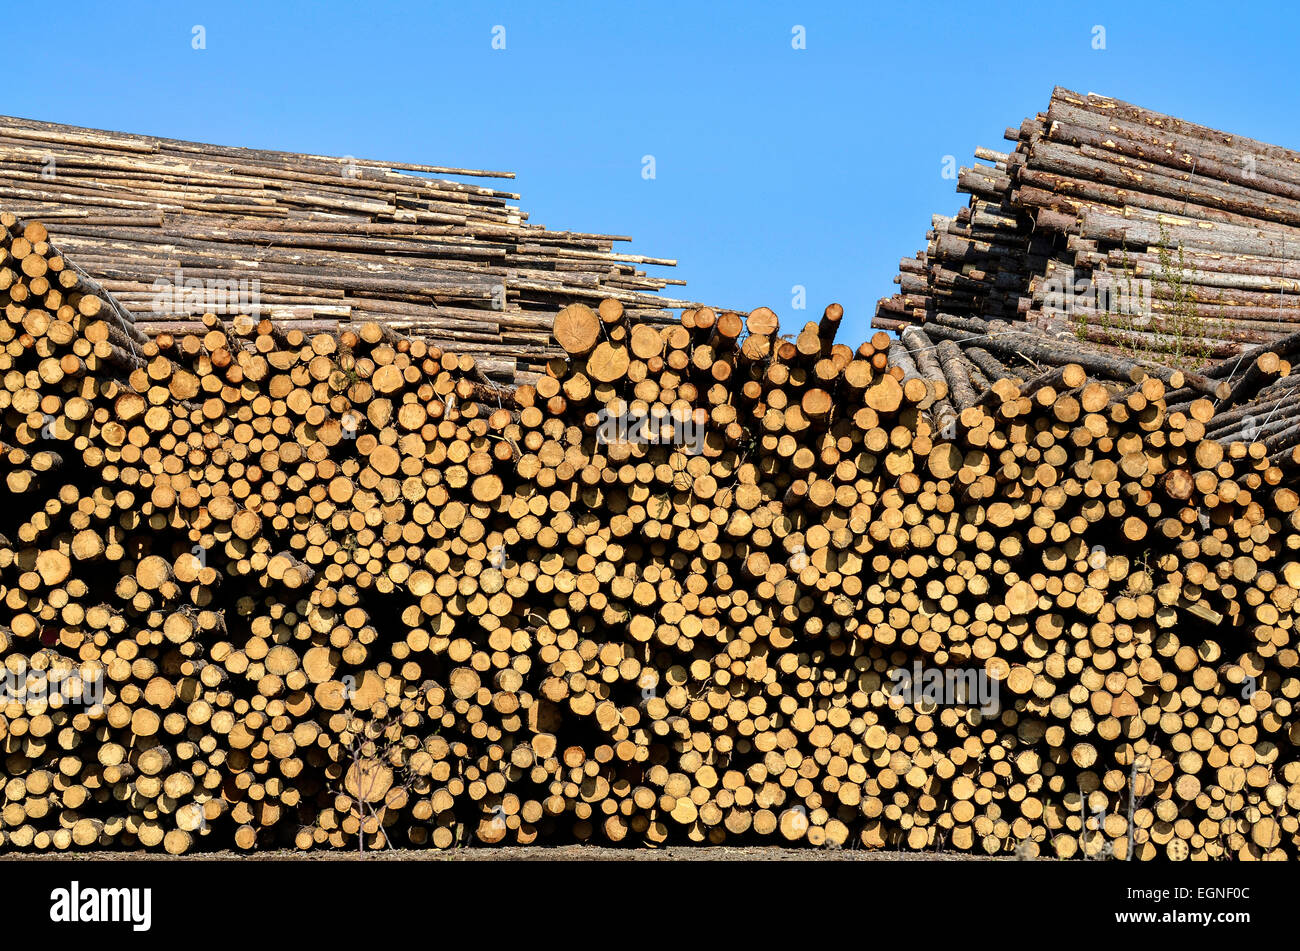 Large stack of timber, blue sky Stock Photo